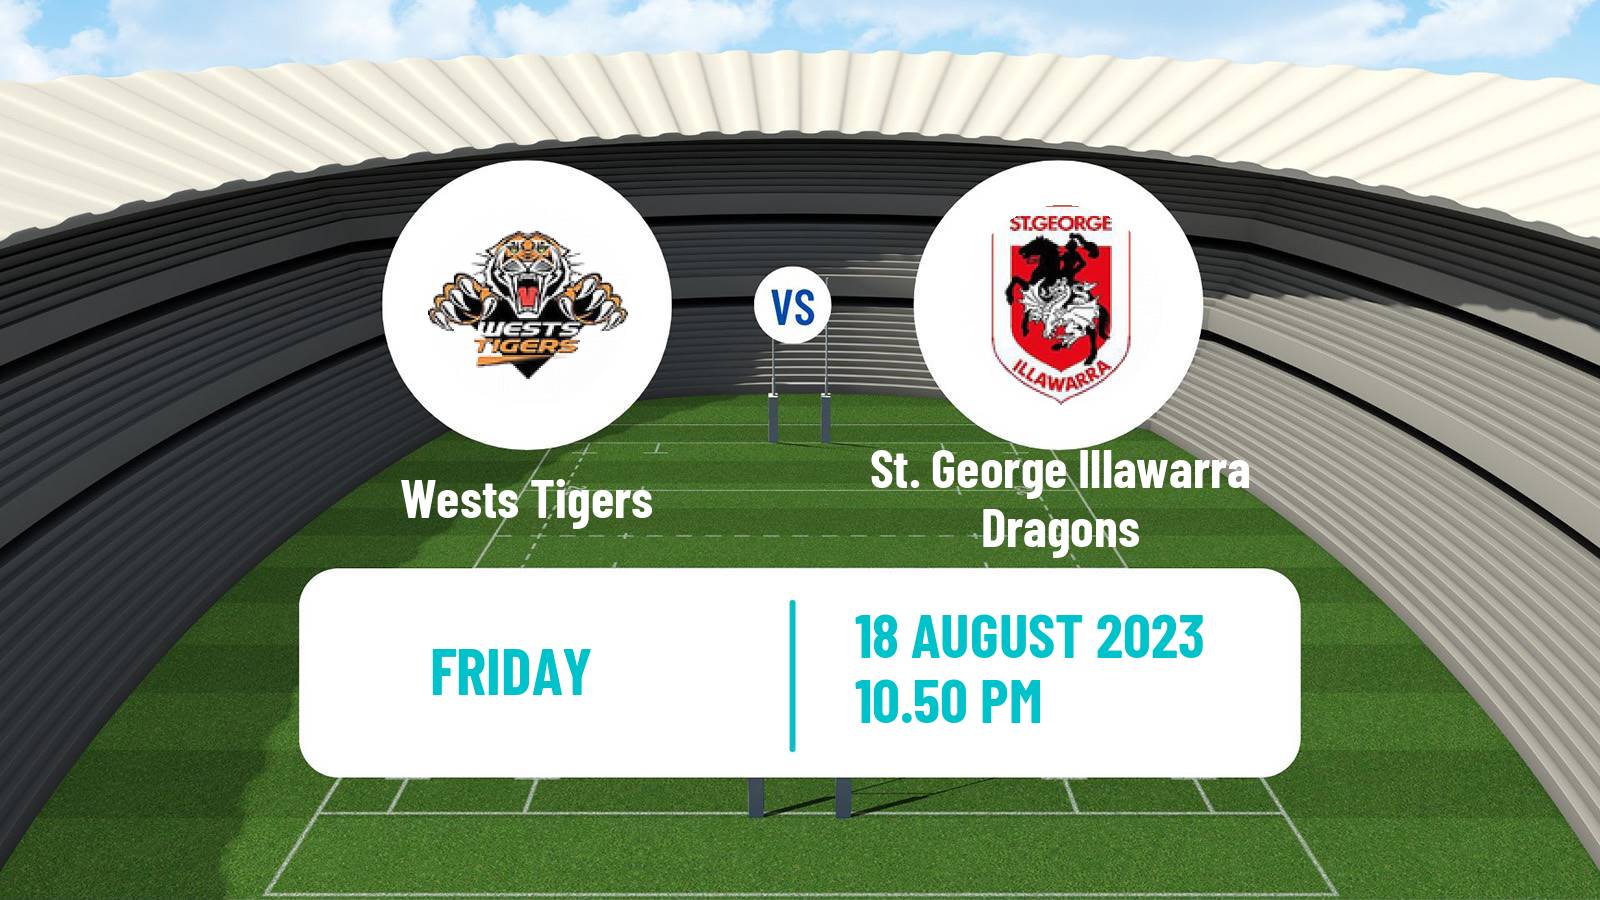 Rugby league Australian Premiership Rugby League Women Wests Tigers - St. George Illawarra Dragons